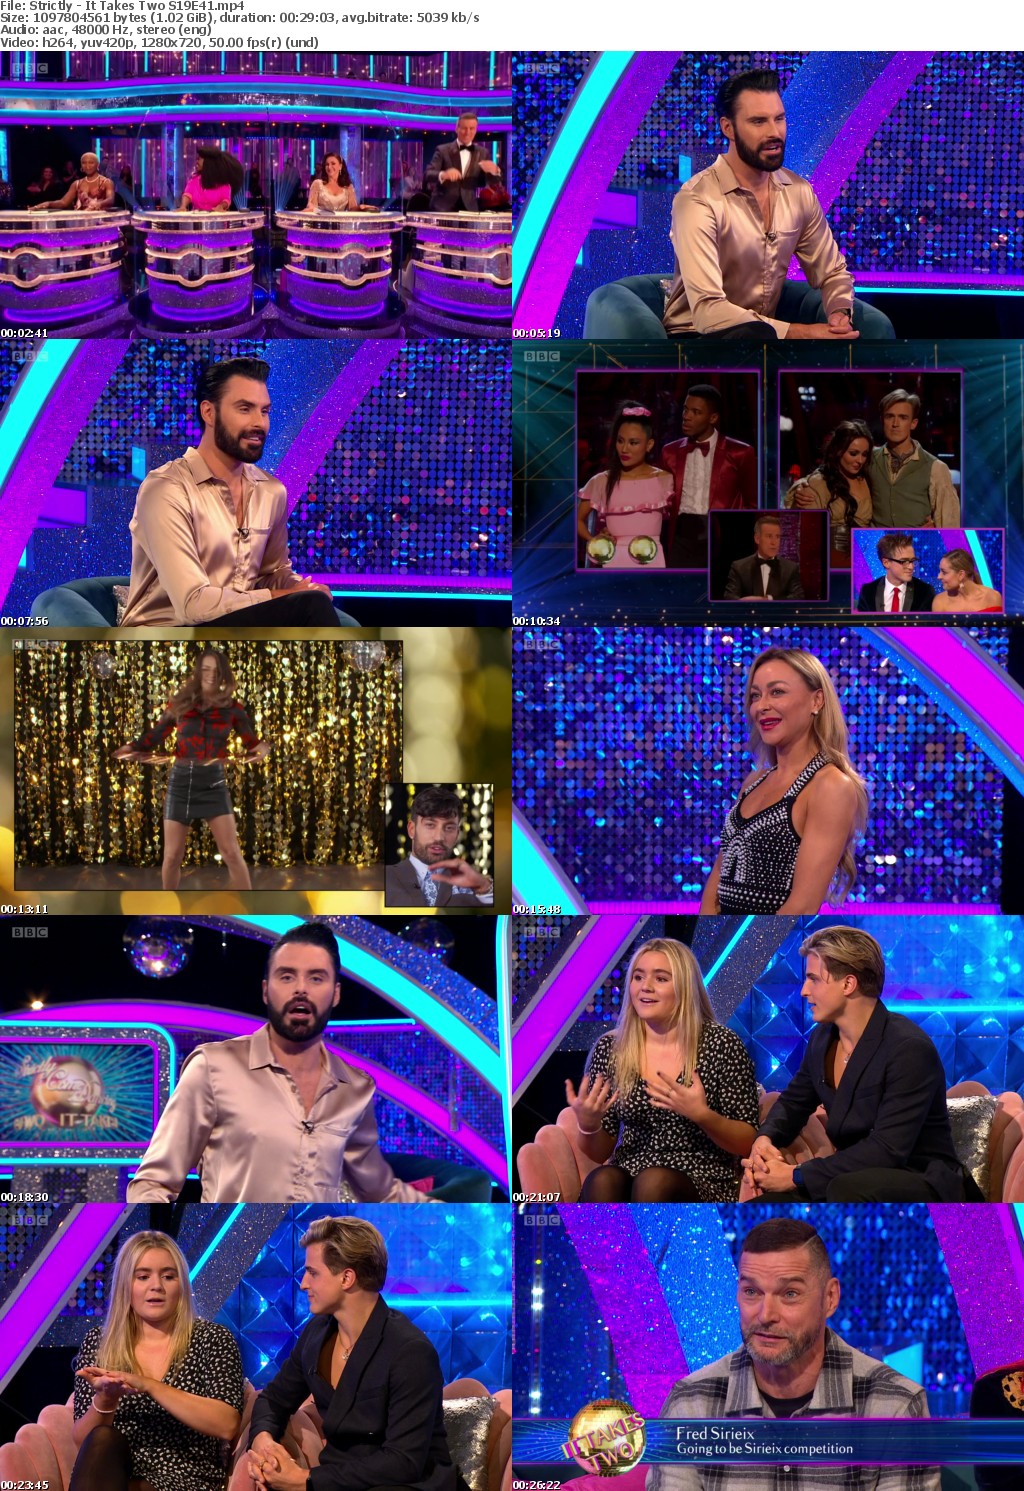 Strictly - It Takes Two S19E41 (1280x720p HD, 50fps, soft Eng subs)